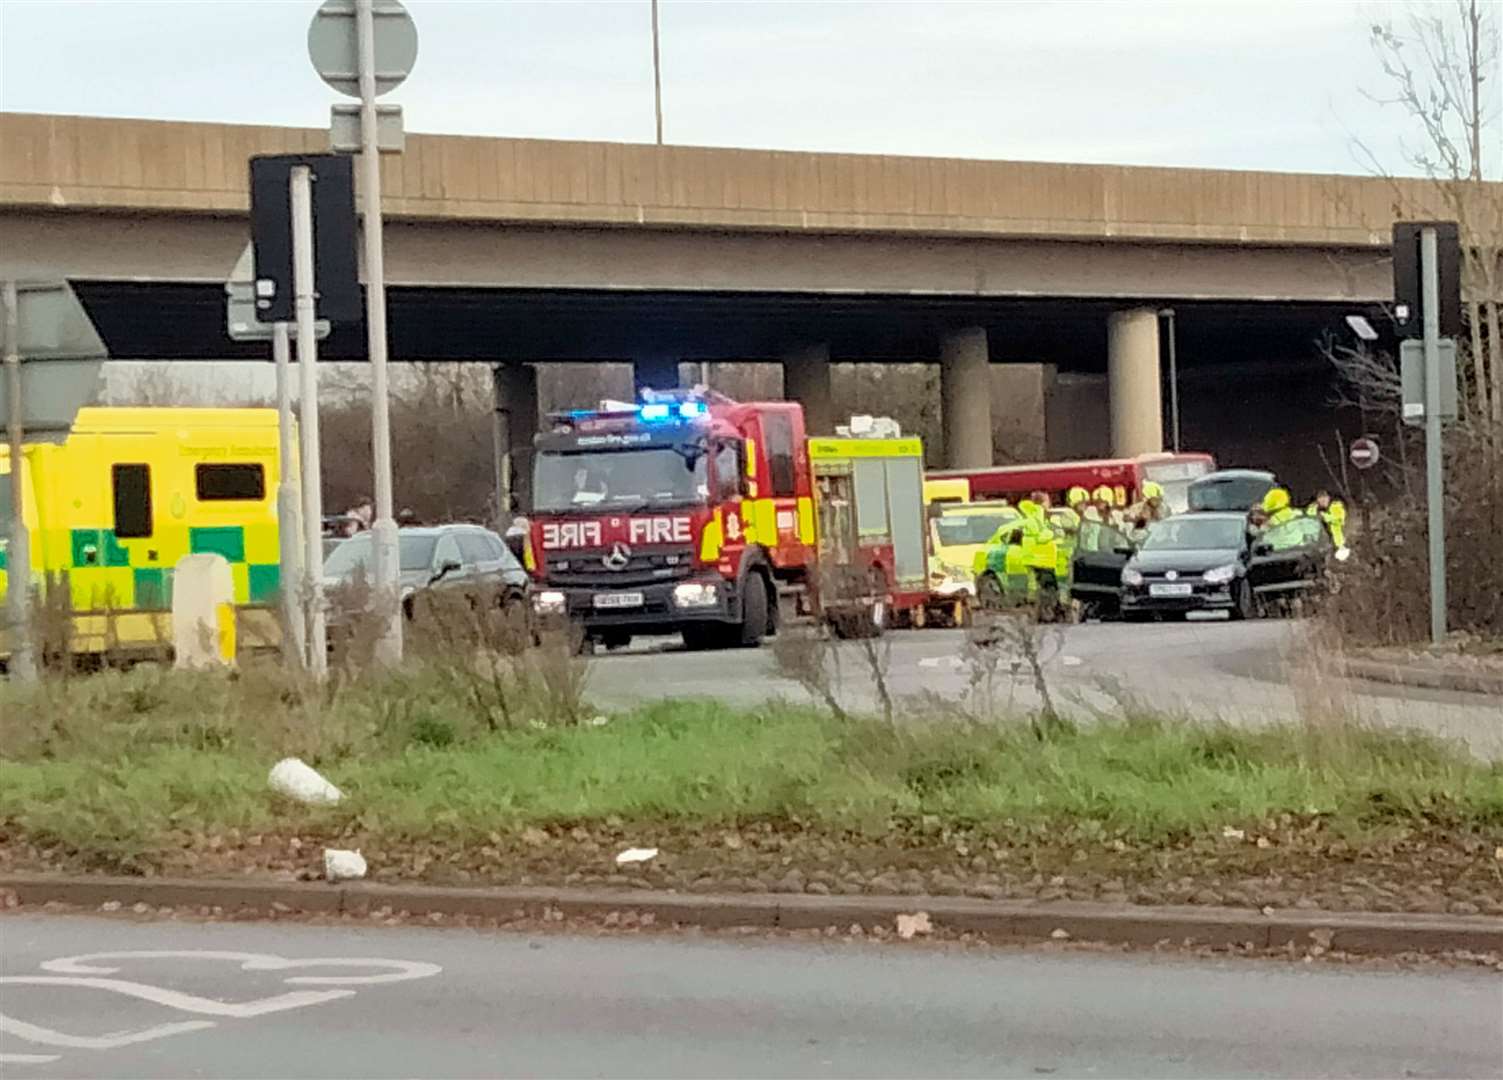 Emergency services are at the scene of a crash at Crittall's Corner Roundabout, near Sidcup